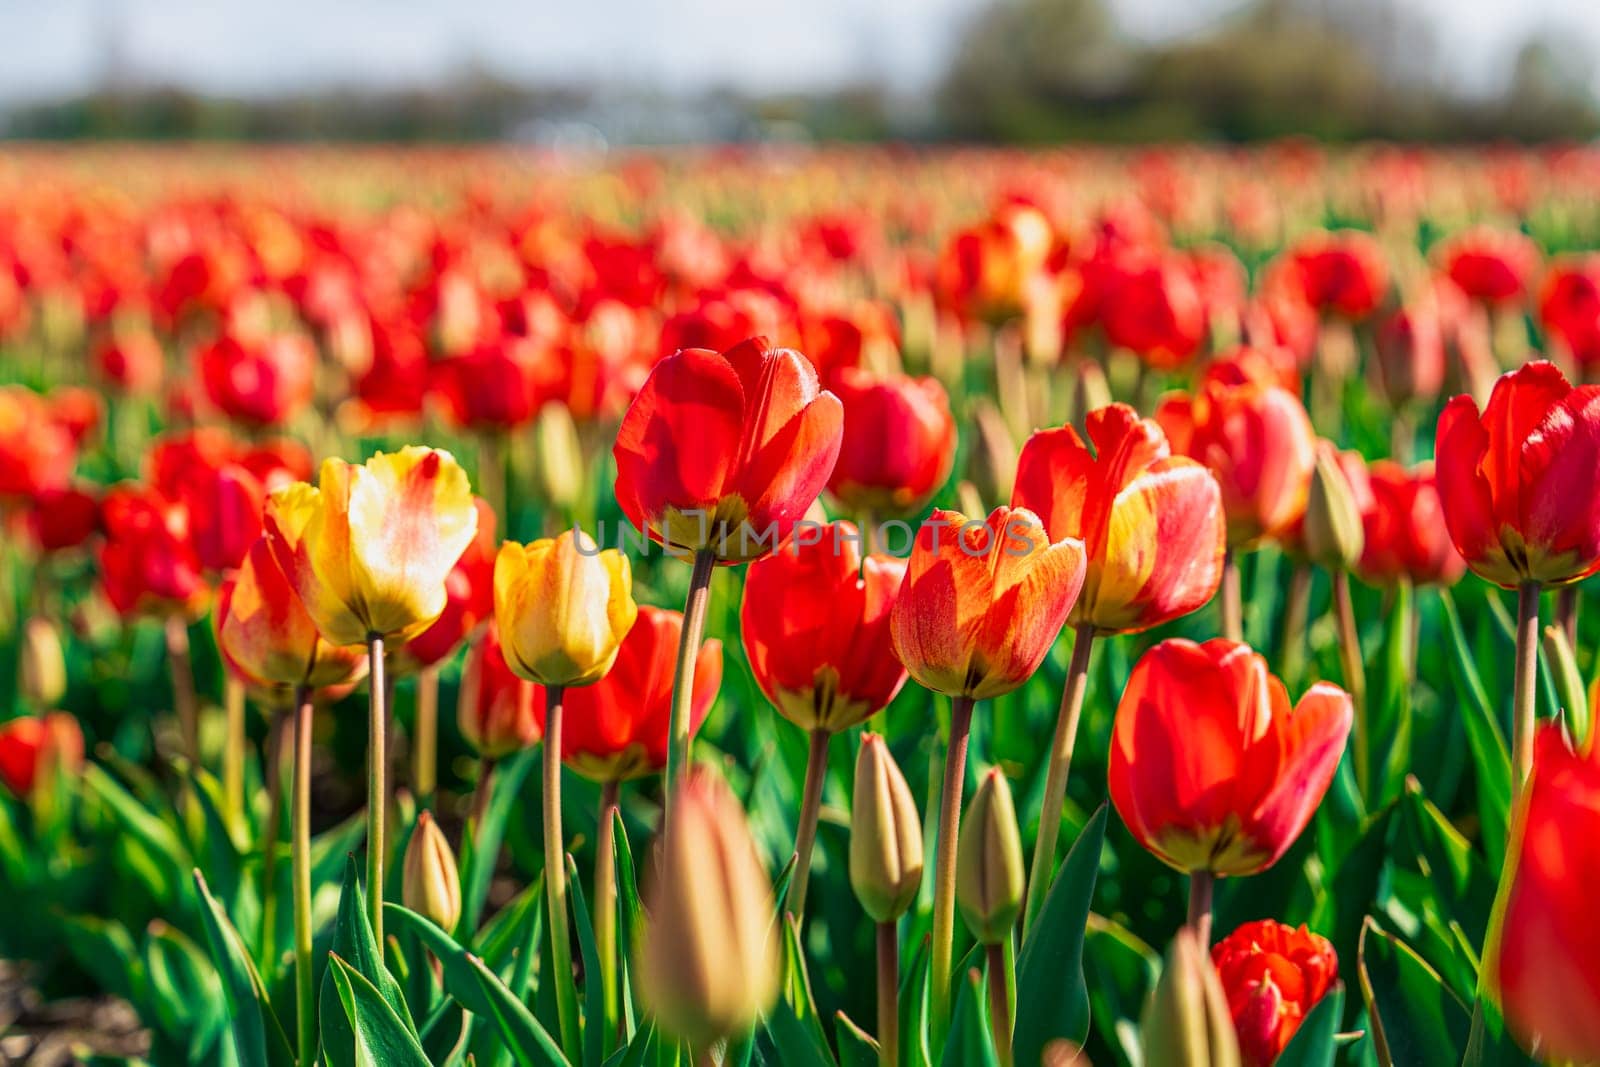 Vibrant Field of Red and Yellow Tulips in the Beautiful Netherlands Landscape by PhotoTime